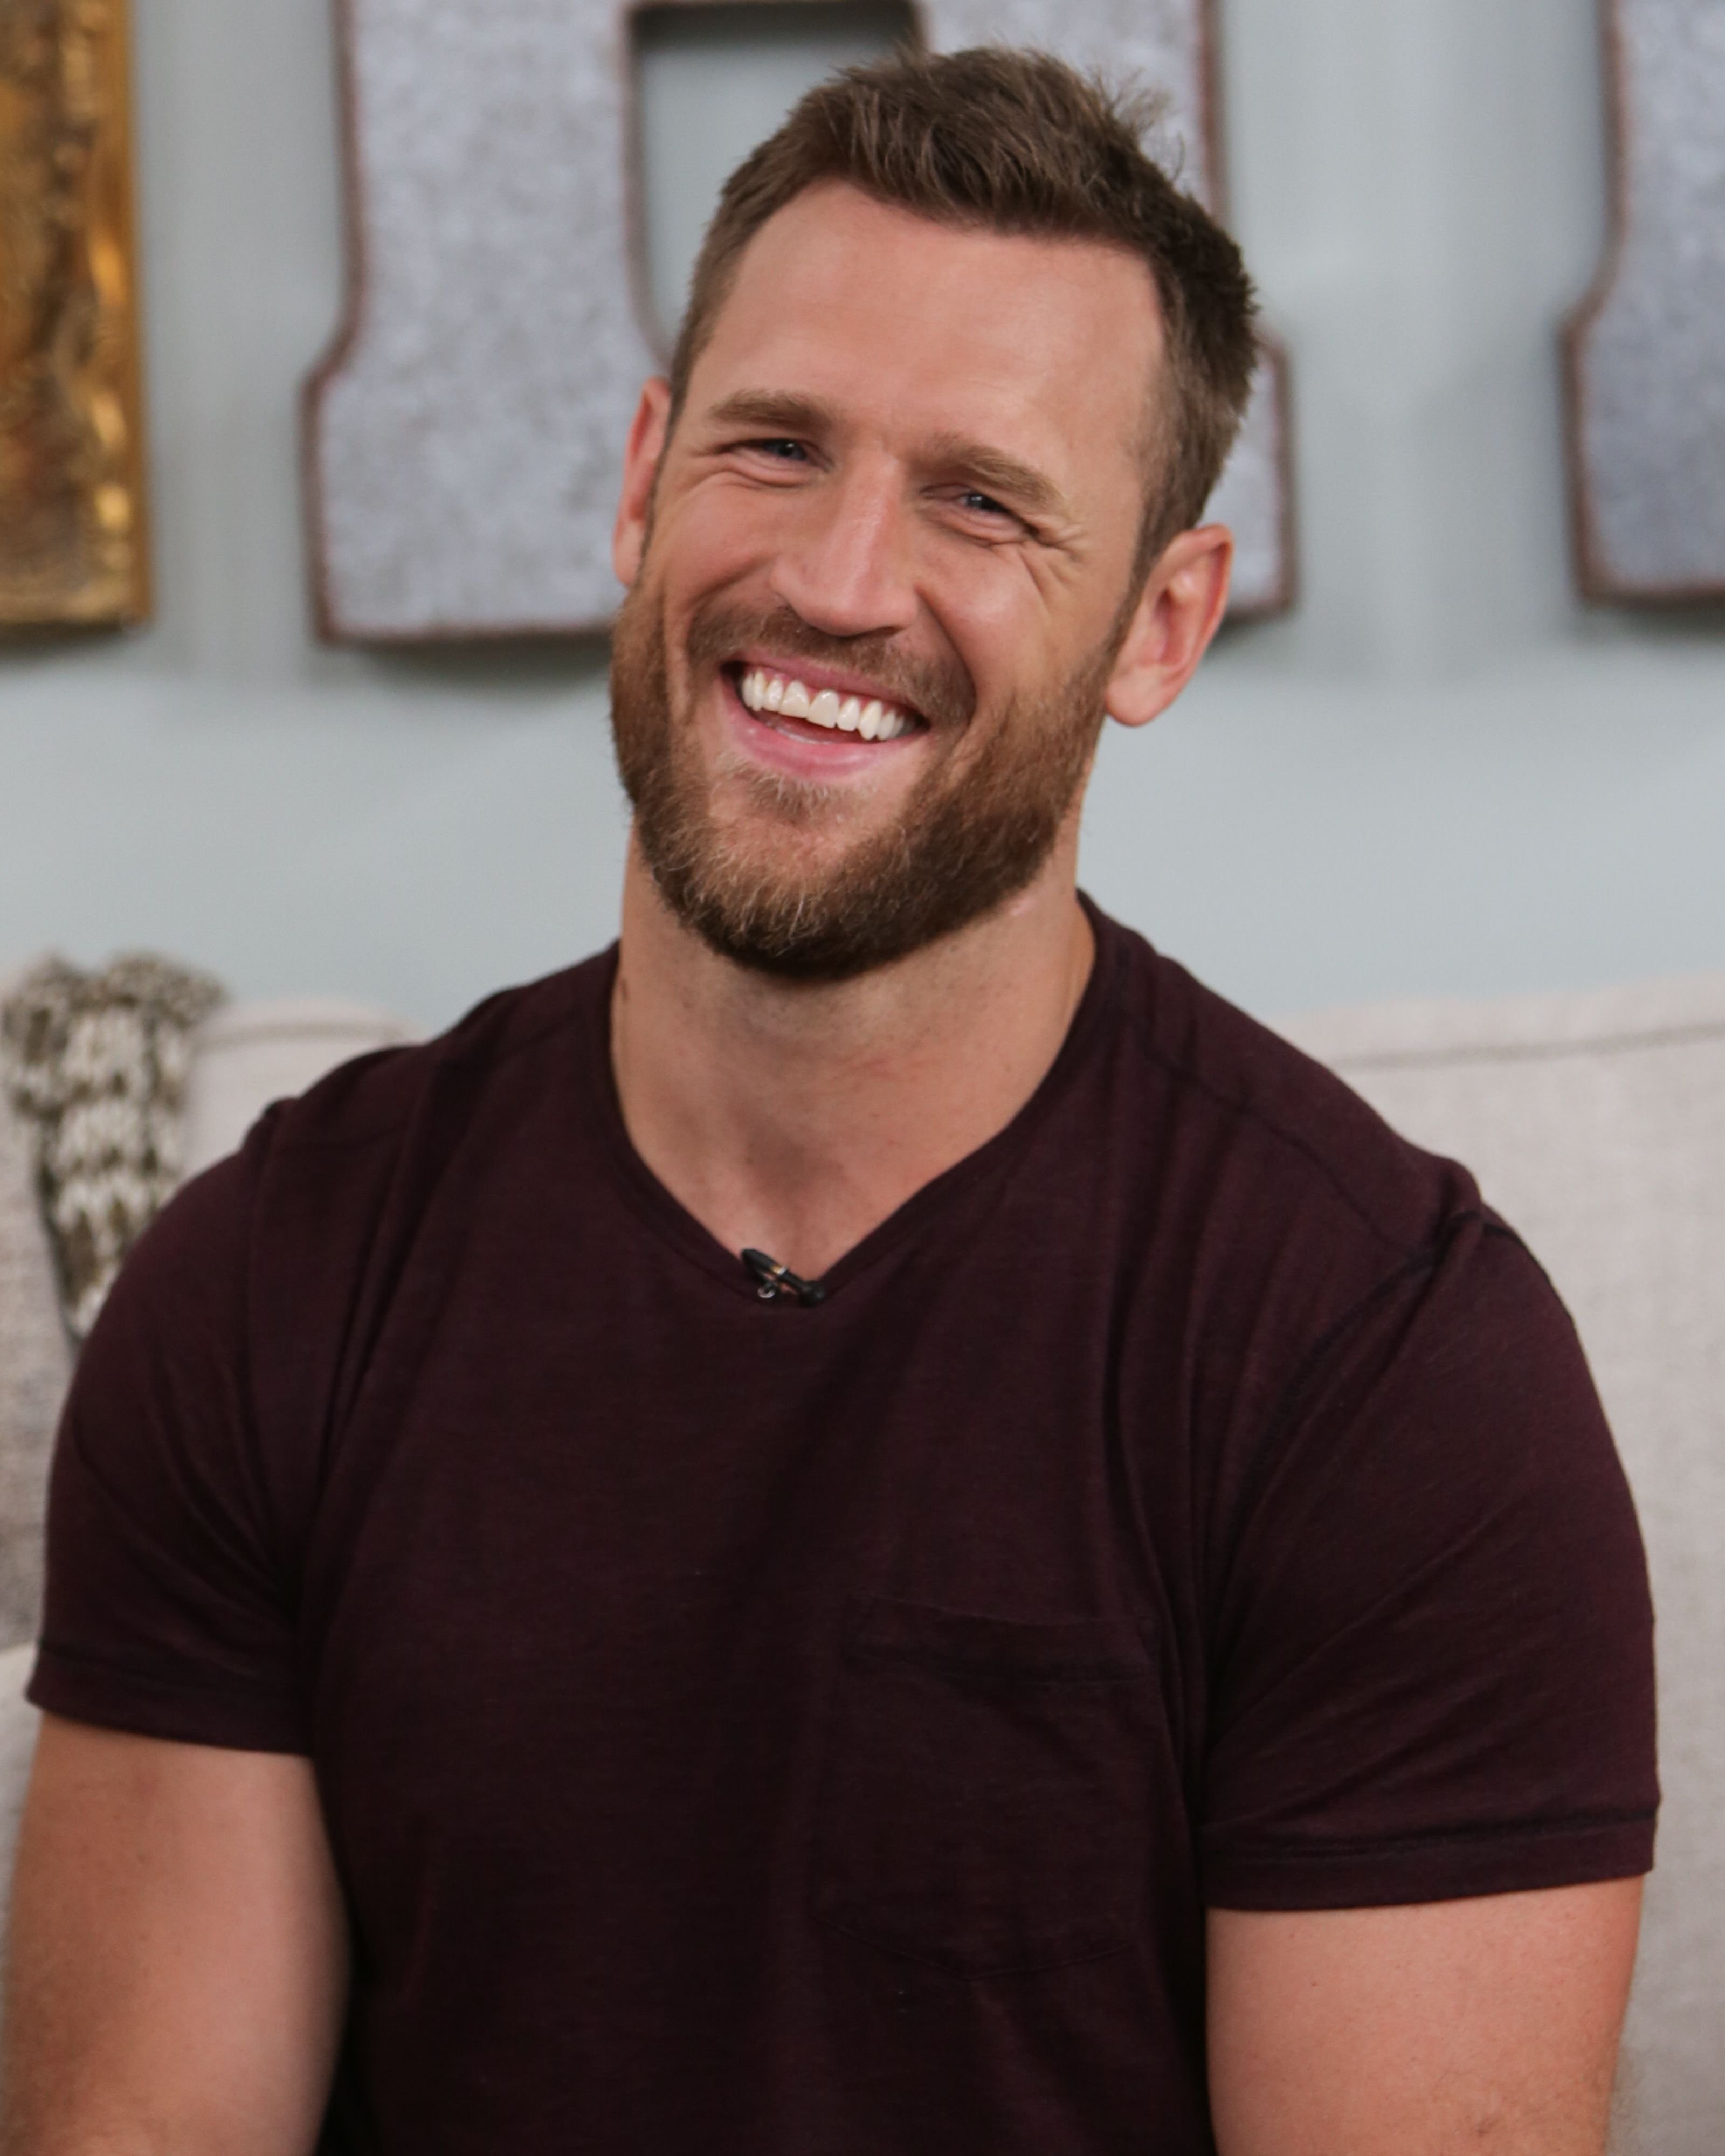 Brooks Laich visits Hallmark's "Home & Family" at Universal Studios Hollywood on September 05, 2019 in Universal City, California | Photo: Getty Images